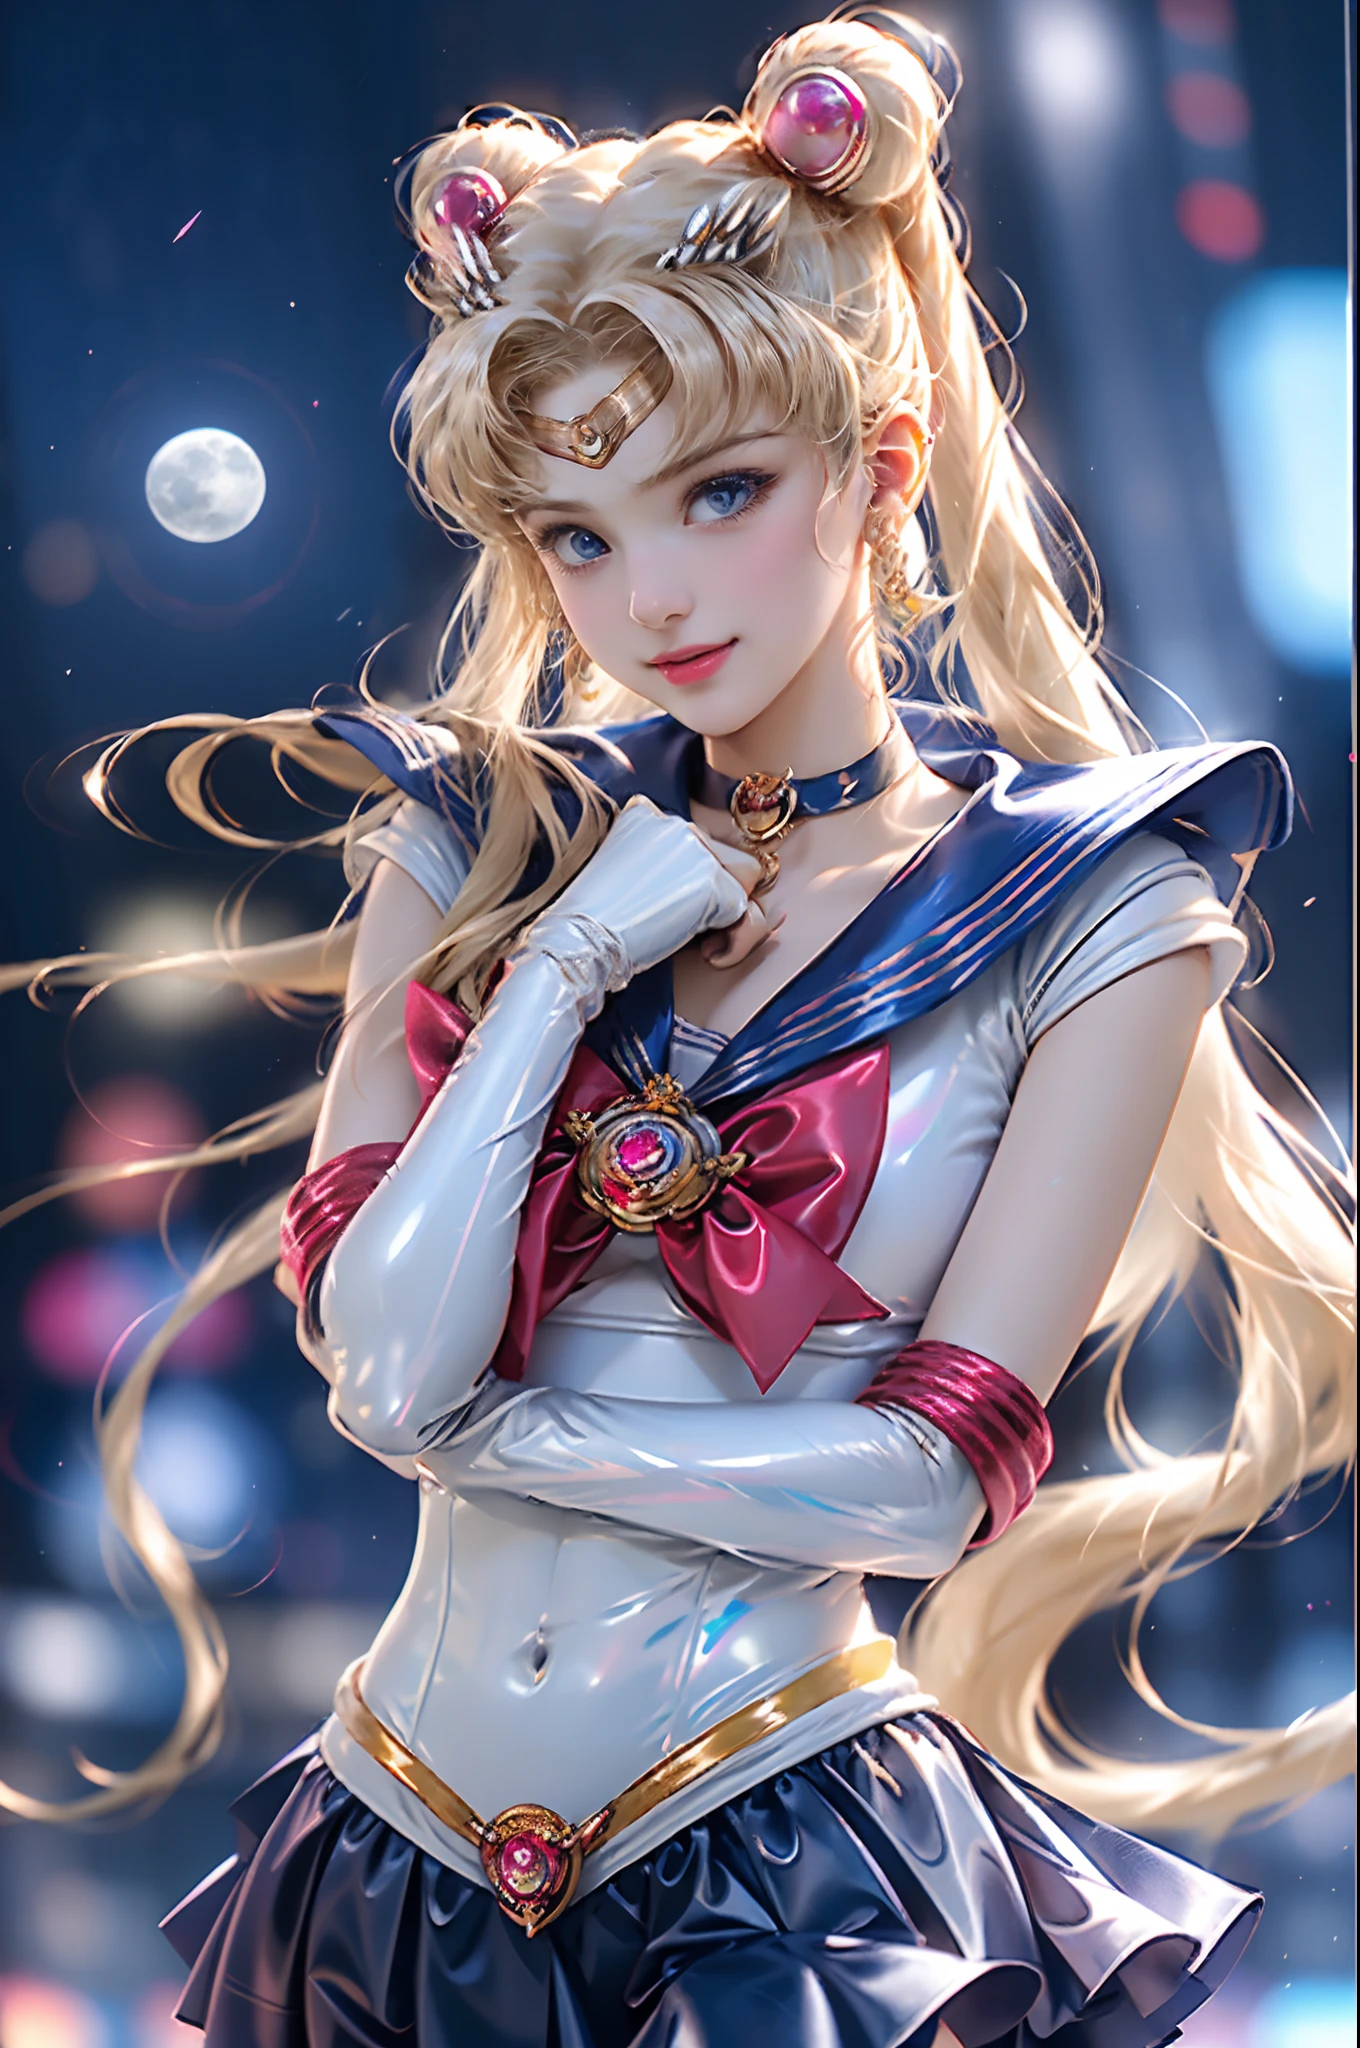 Masterpiece, Full: 1.3, Stand, 8K, 3D, Realistic, Ultra Micro Shooting, Top Quality, Extreme Detail CG Unity 8K Wallpaper, from below, intricate details, (1 female), 18 years old, (Sailor Moon supersailormoon mer1, Tiara, Sailor Senshi Uniform Sailor: 1.2, Sailor Moon: 1.2), Impossibly long bright twin-tailed blonde, thin and very long straight twin-tailed blonde, hair bun, red round hair ornament in a hair bun, Sailor Senshi uniform, (blue collar, blue sailor collar, blue pre-gate mini skirt: 1.3, very large red bow on the chest: 1.3, long white latex gloves: 1.3, red gloves on the elbows, Very large red bow behind the waist: 1.1, cleavage is looking large, golden tiara, earrings), (face details: 1.5, bright blue eyes, beautiful face, beautiful eyes, shiny eyes, thin lips: 1.5, thin and sharp pale eyebrows, long dark eyelashes, double eyelashes), luxurious golden jewelry, thin, thin and muscular, small face, big breasts, perfect proportions, Thin waist, sexy model pose, visible pores, seductive smile, perfect hands: 1.5, high-leg swimsuit, very thin and fit high-gloss white holographic leather, octane rendering, very dramatic image, strong natural light, sunlight, exquisite lighting and shadow, dynamic angle, DSLR, sharp focus: 1.0, Maximum clarity and sharpness, (space background,moon, dynamic background, detailed background),(aausagi, double bun, twintails, parted bangs, circlet, jewelry, earrings, choker, red bow, white gloves, elbow gloves, blue skirt
),kda